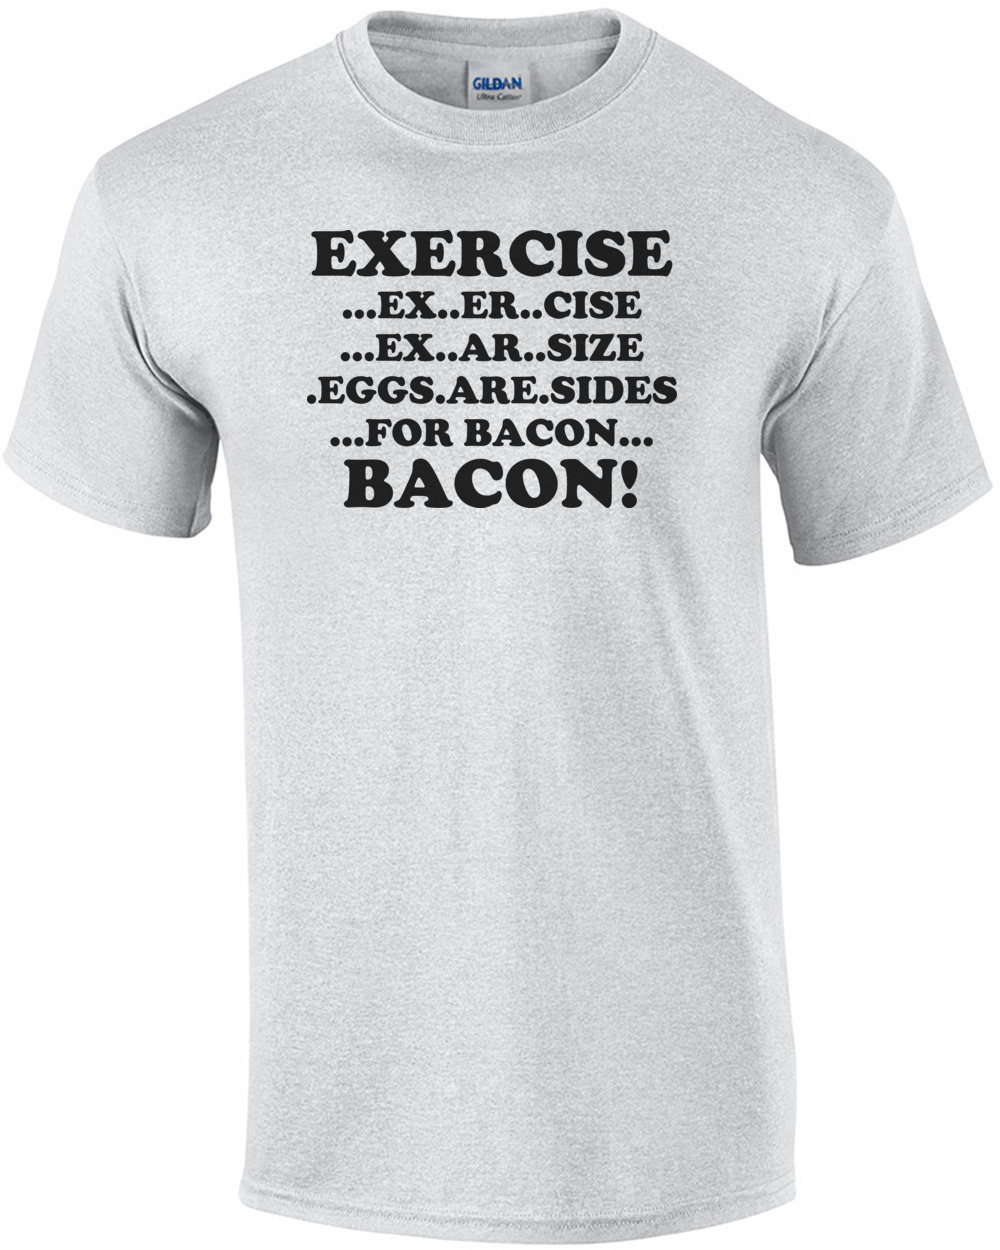 Long Sleeve Shirt Eggs Are Sides For Bacon Shirt Adult Humor Shirt Funny Graphic Tee for Men Sweatshirt Funny Shirt for Men